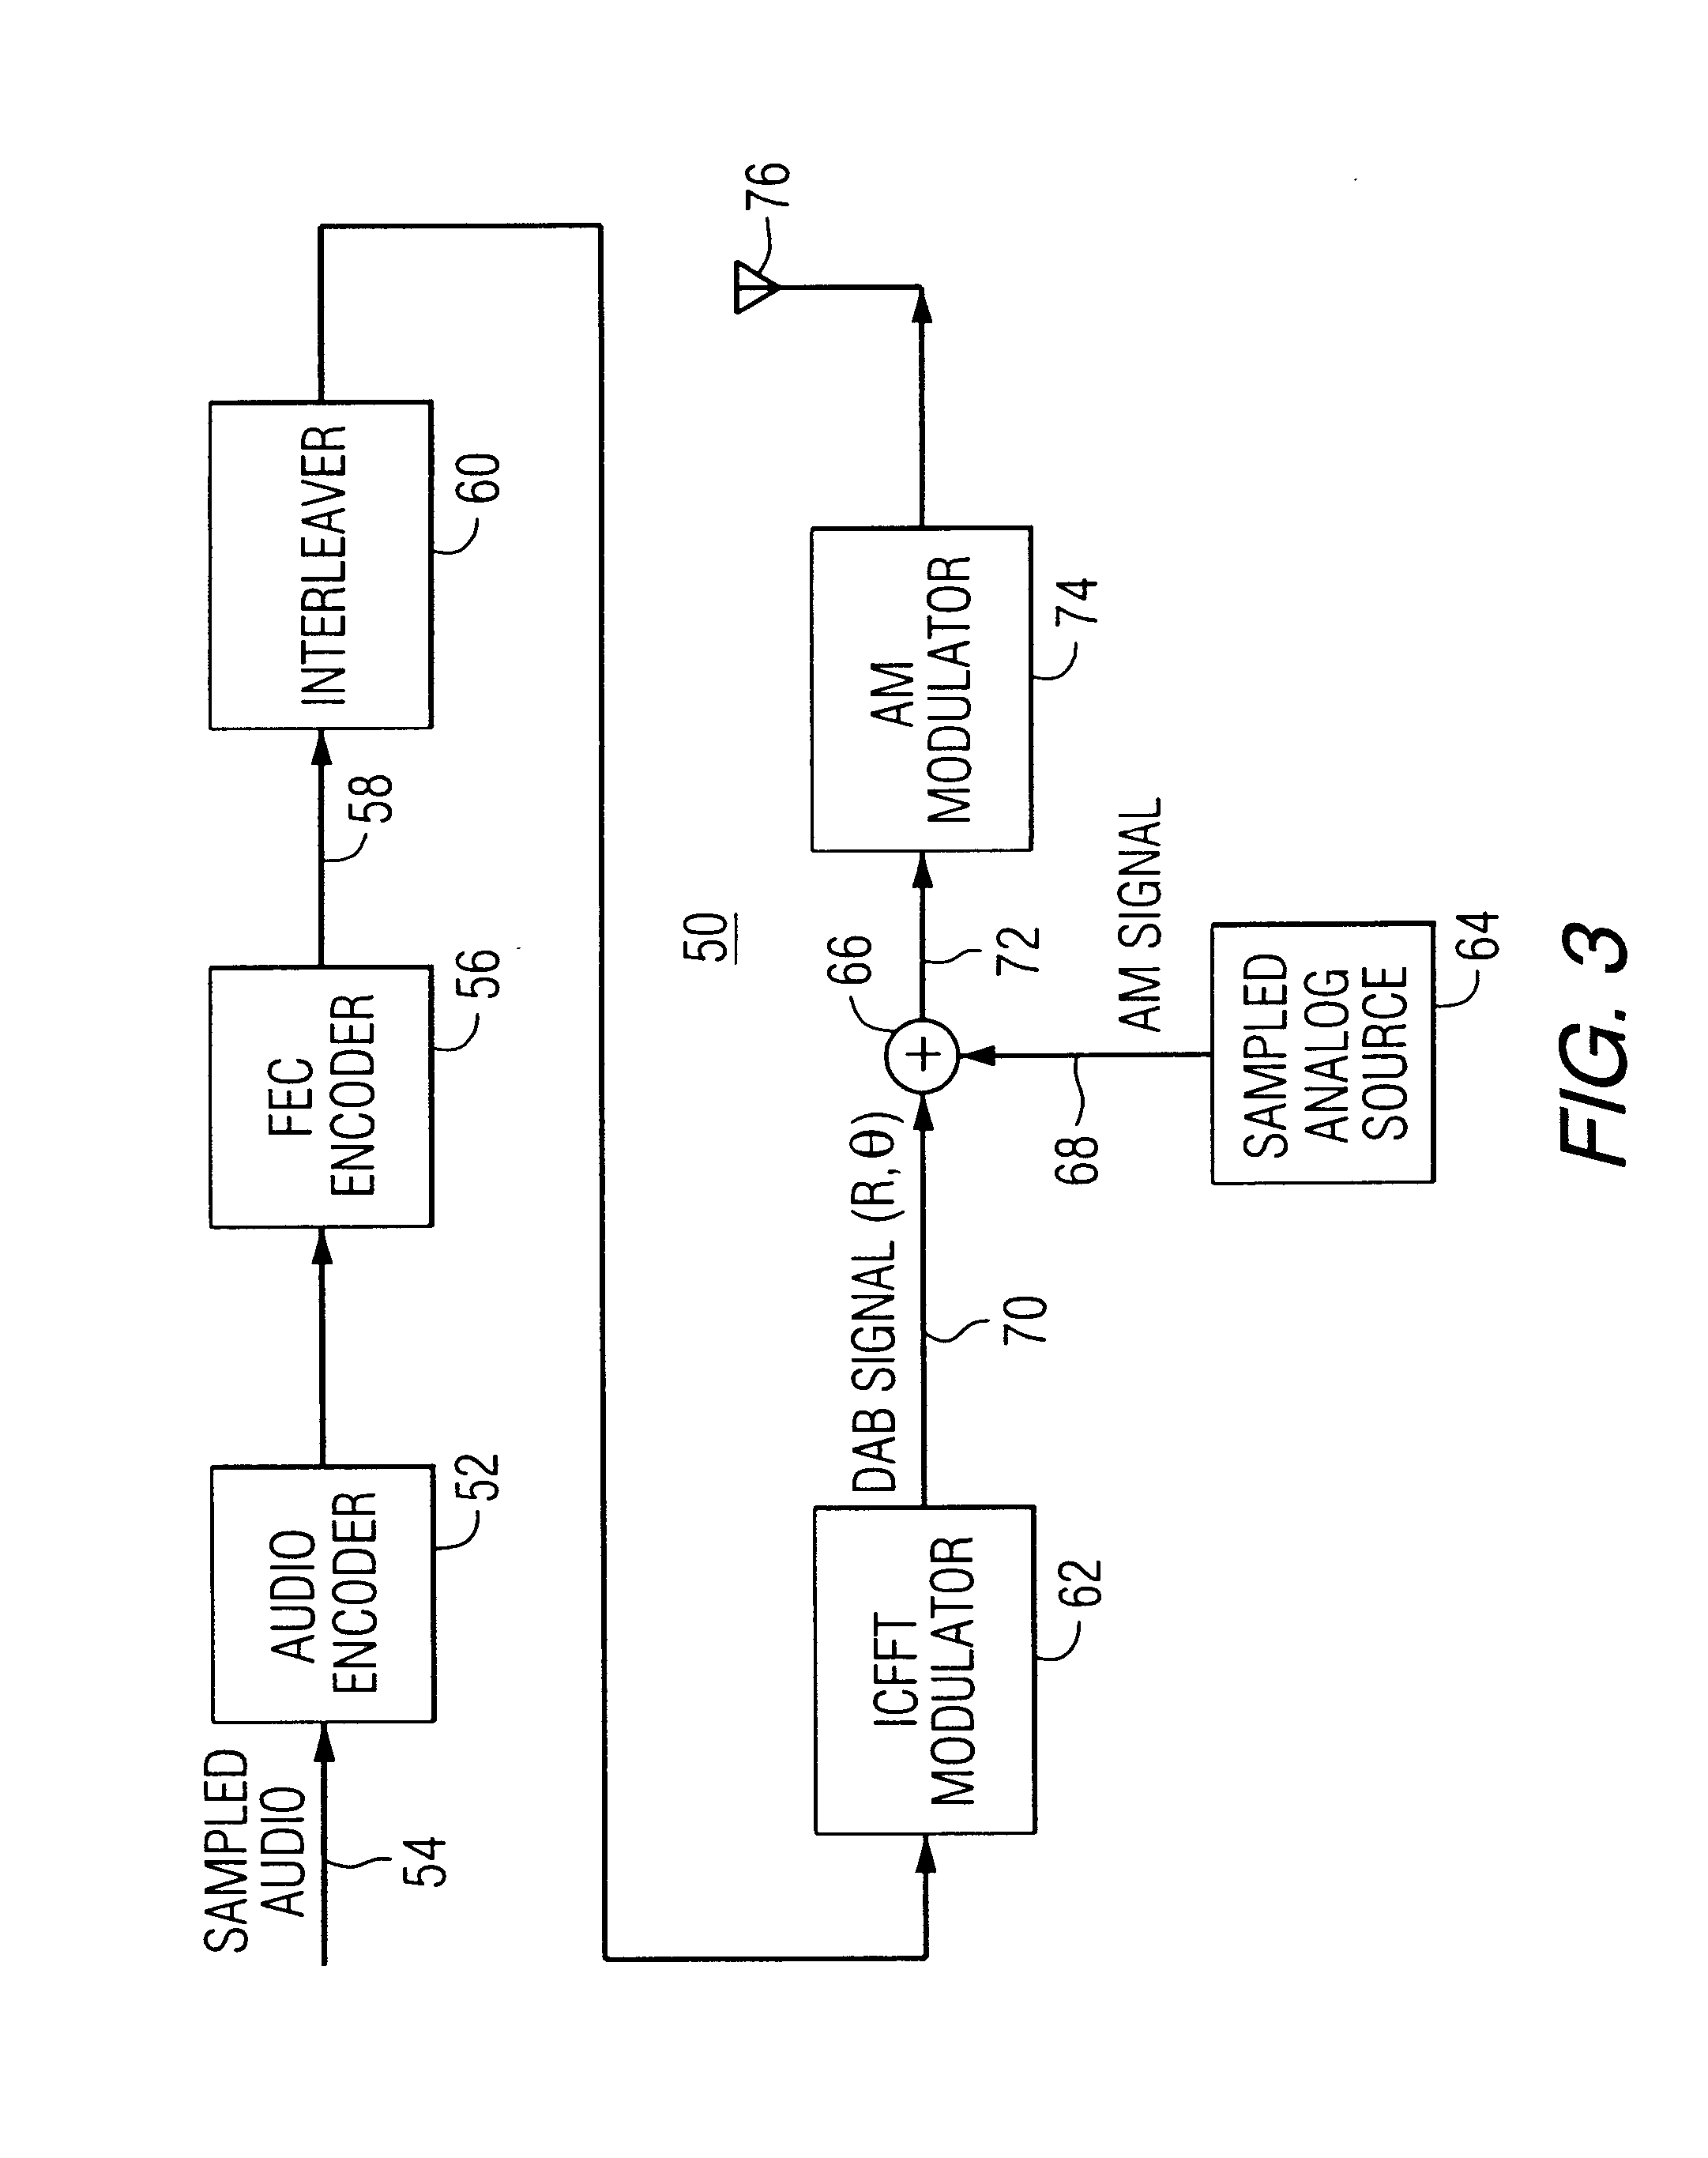 Digital audio broadcasting method and apparatus using complementary pattern-mapped convolutional codes